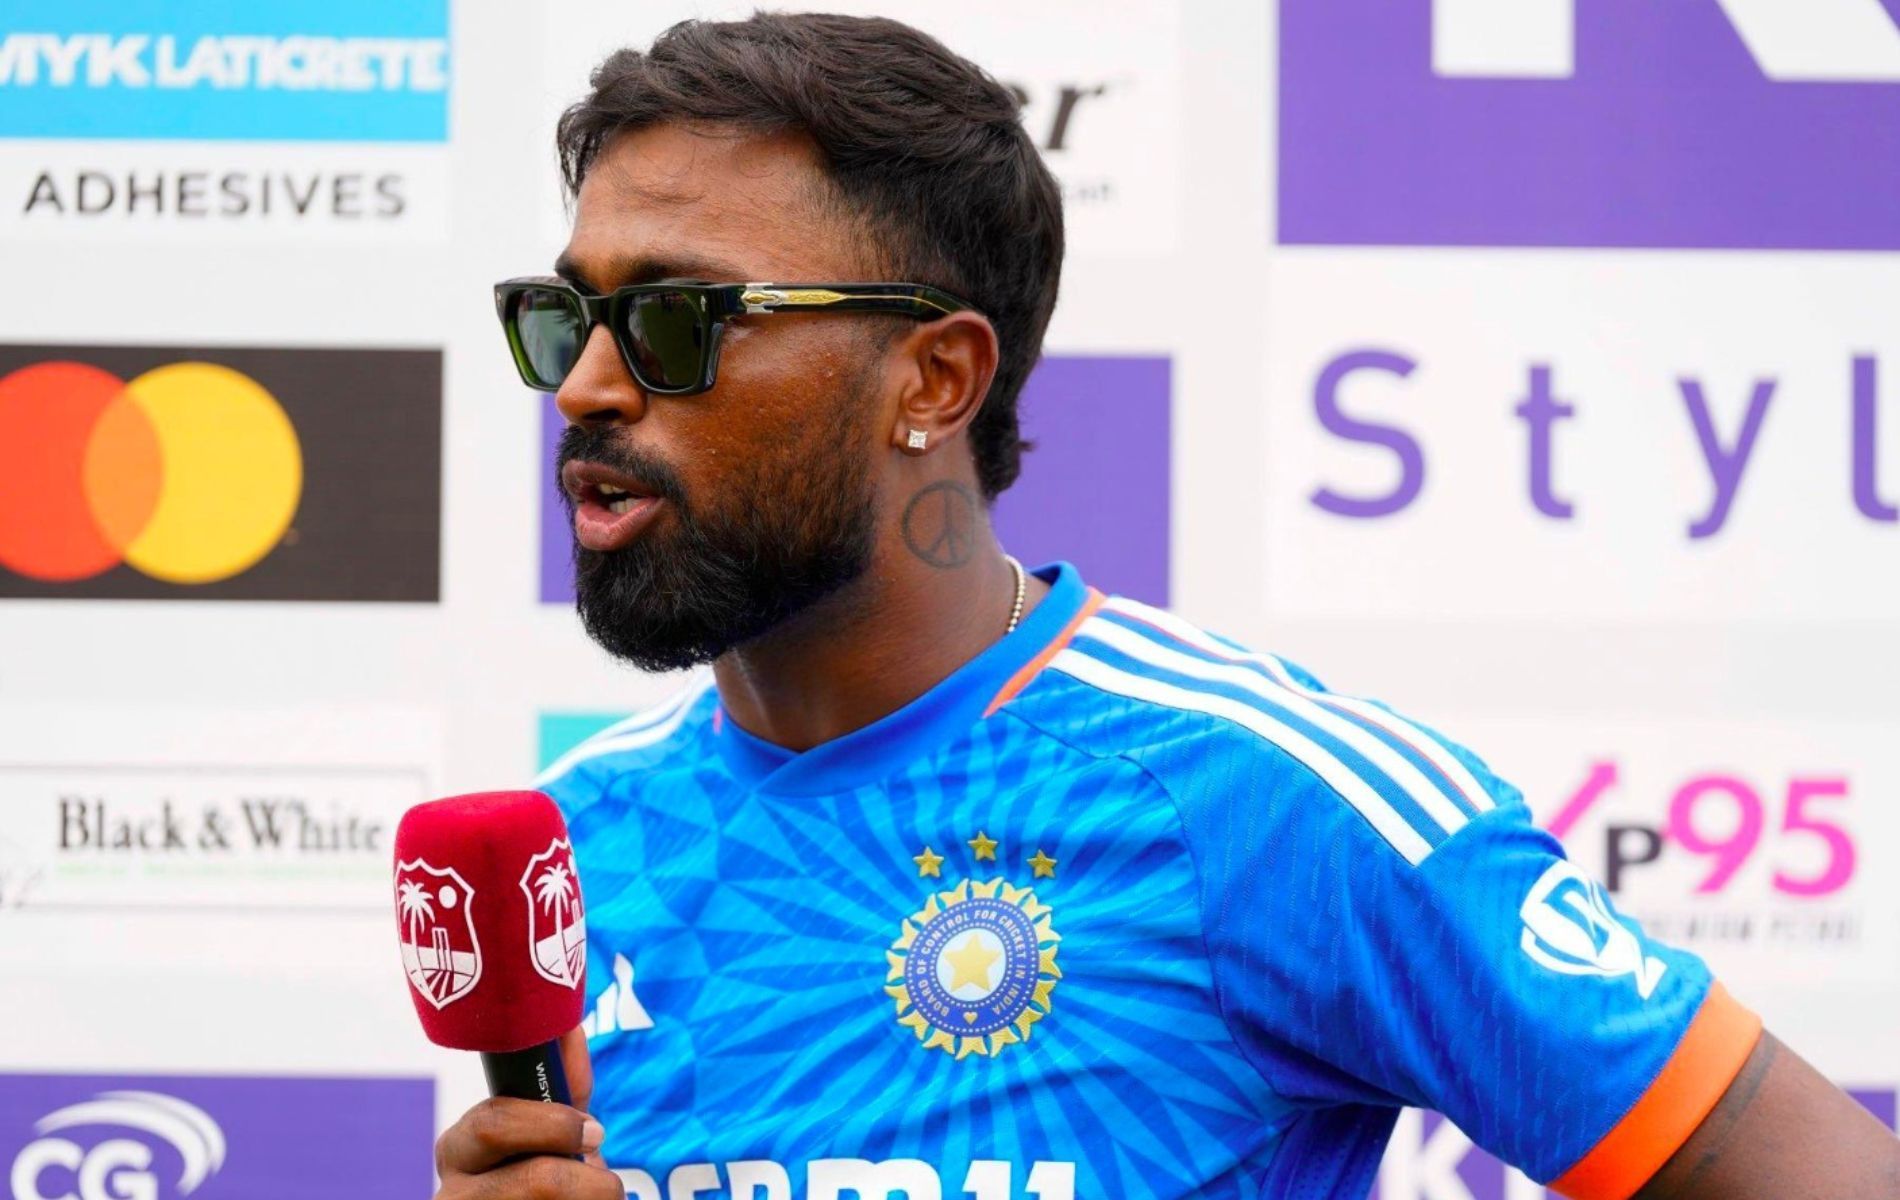 Hardik Pandya scored 14 runs and went wicketless in the fifth T20I. (Pic: Twitter)